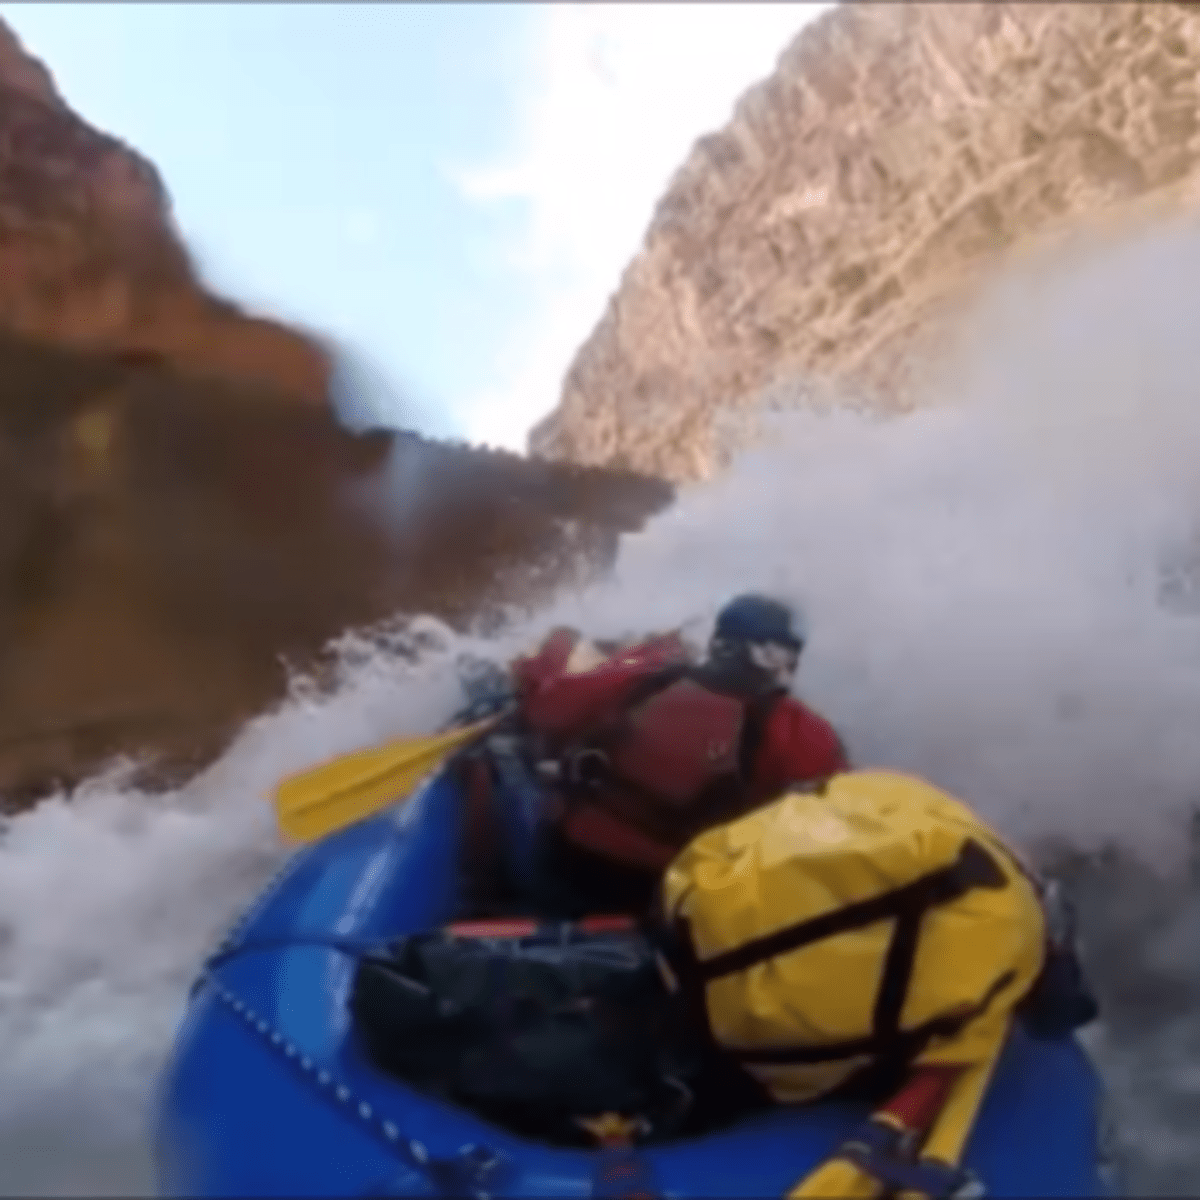 Rafting the Grand Canyon, Solo - Men's Journal